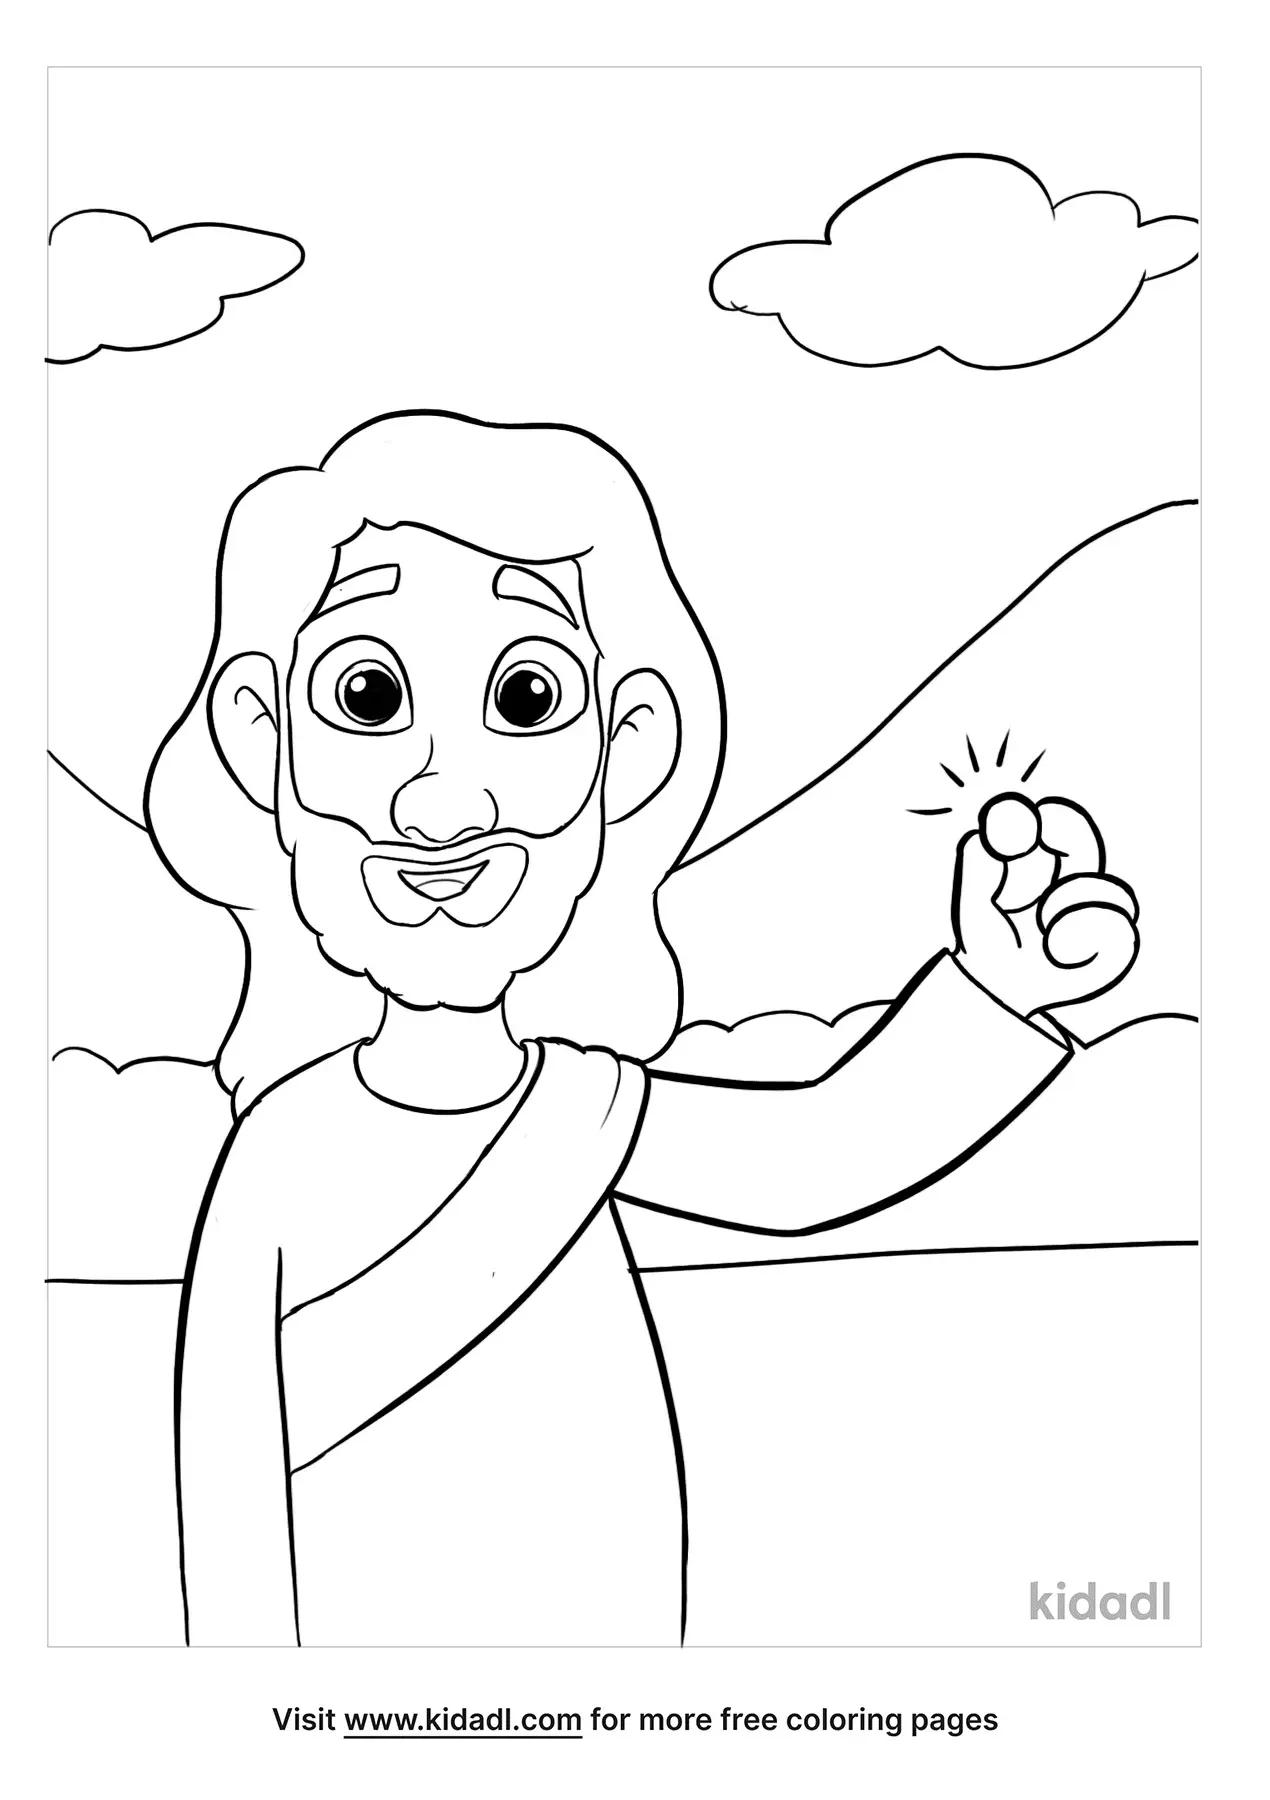 Free Parable Of The Talents Coloring Page | Coloring Page Printables ...